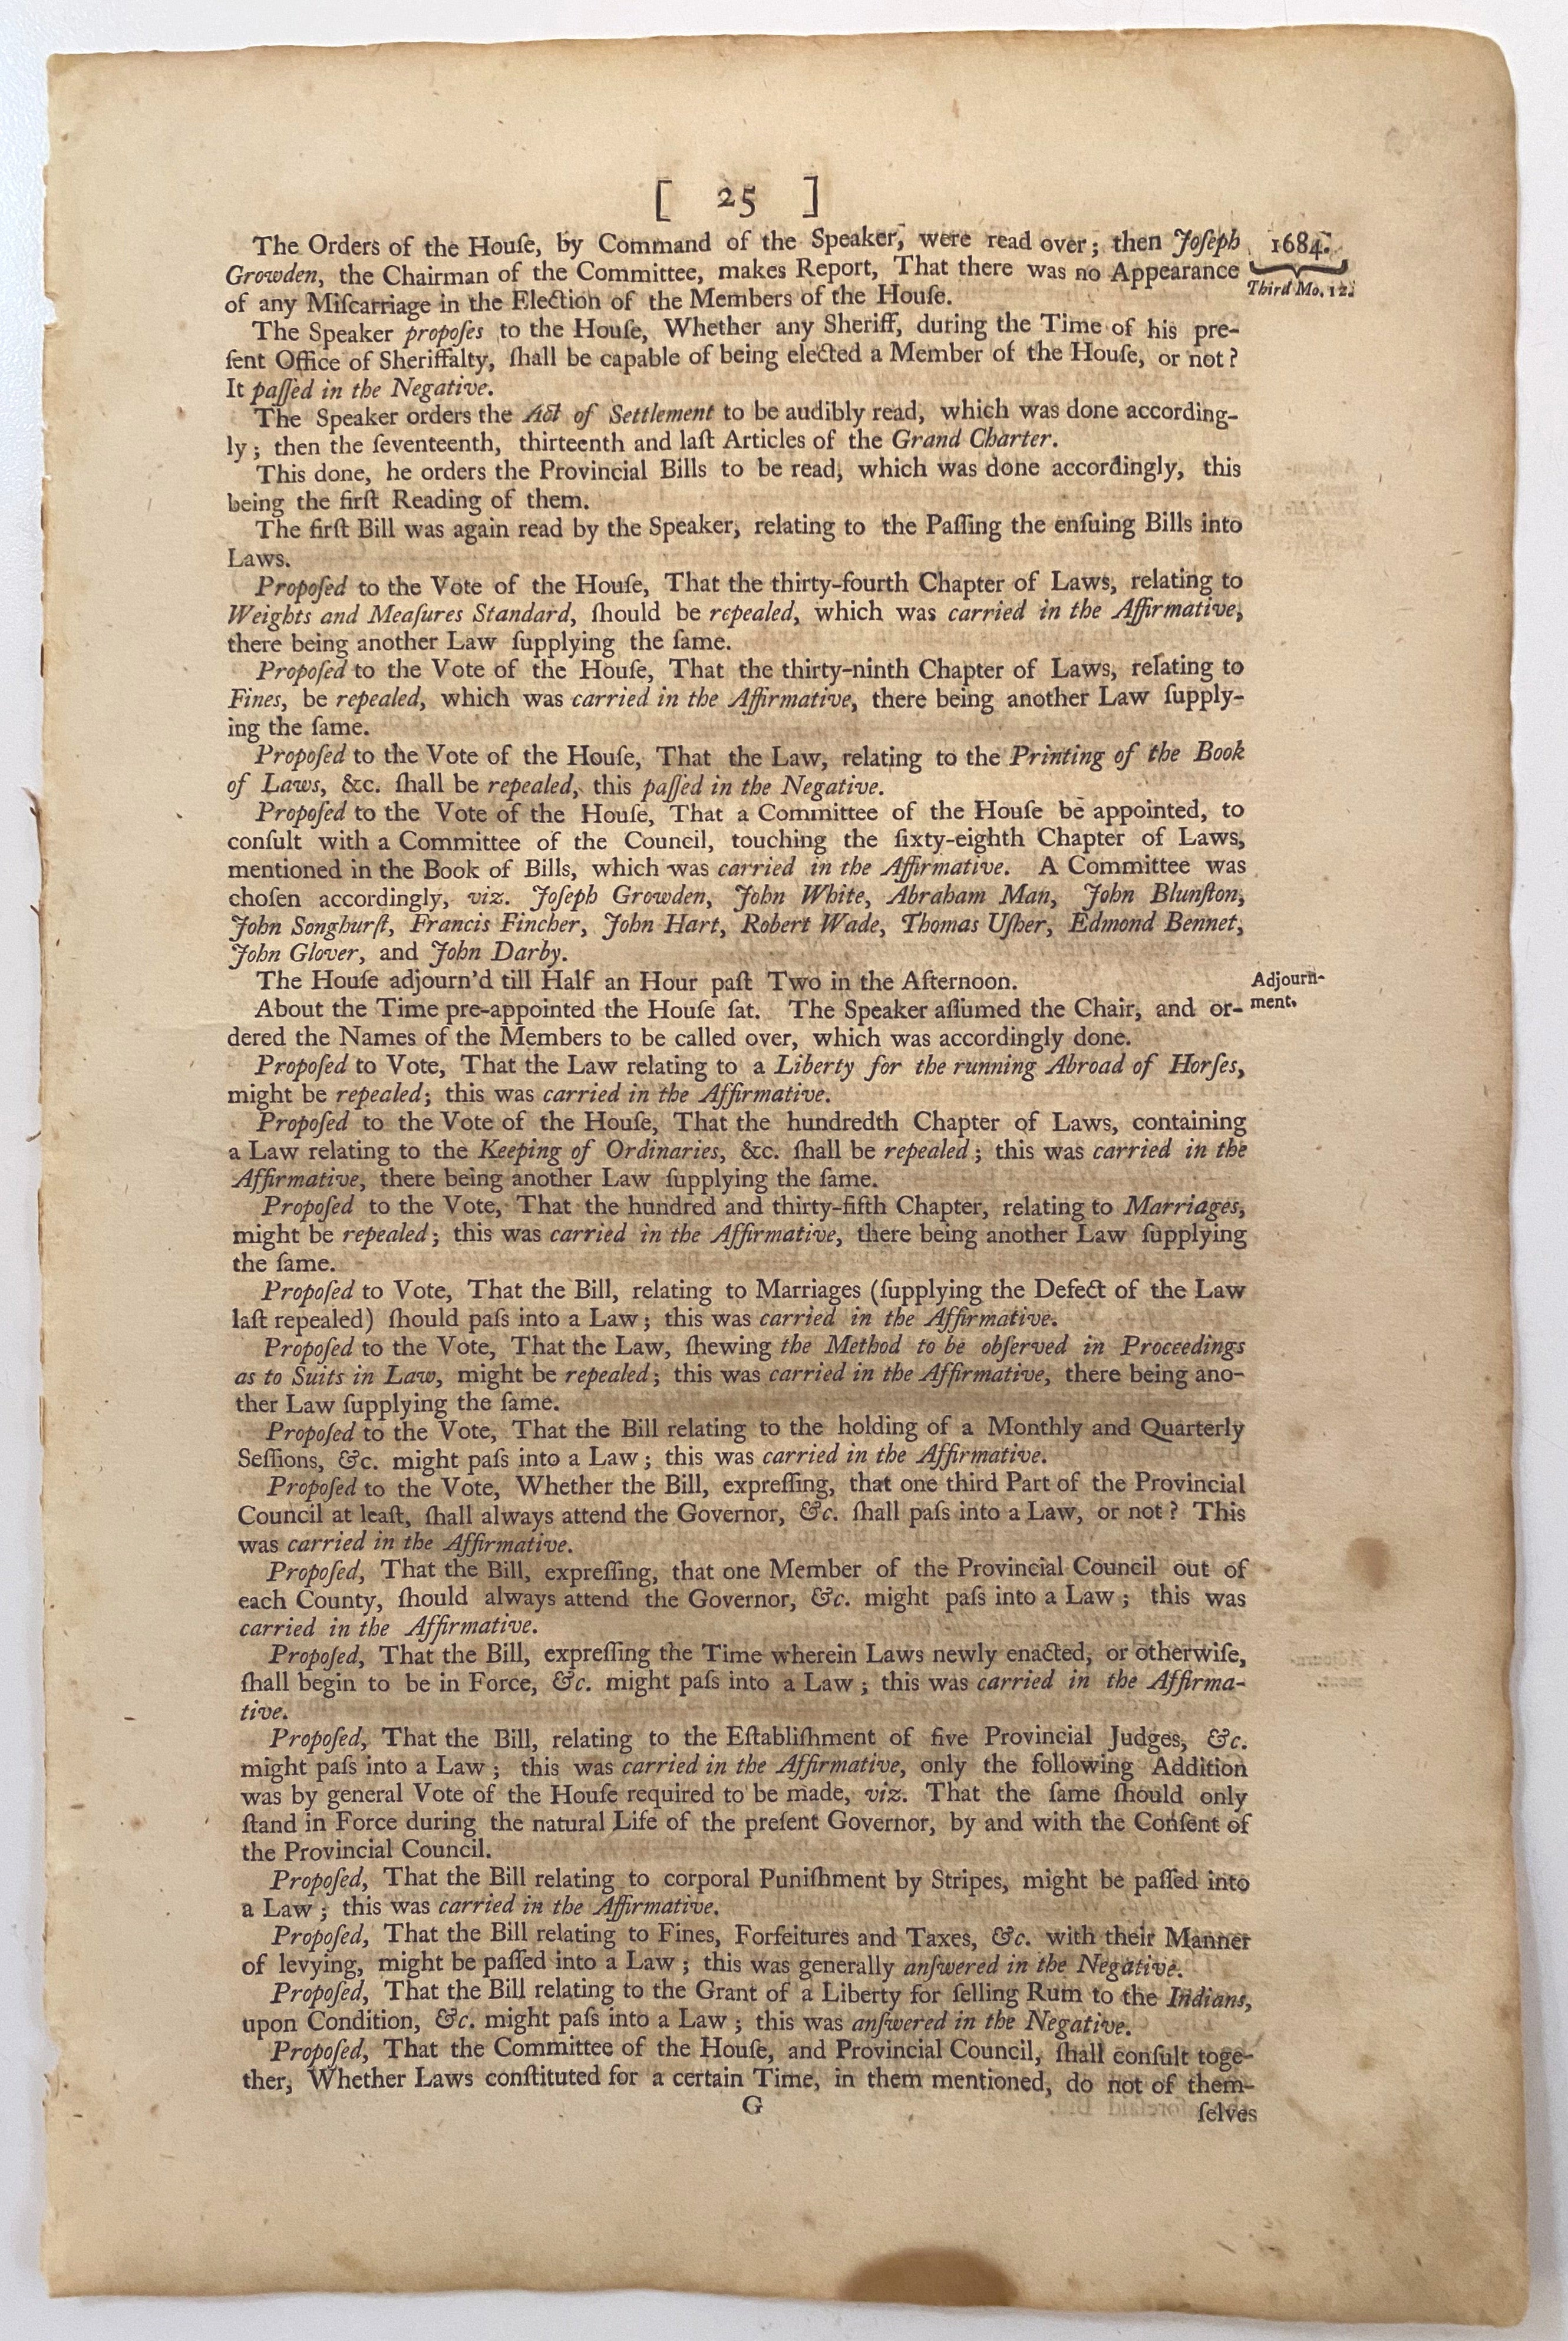 ACTUAL PAGE PRINTED BY BENJAMIN FRANKLIN IN 1752